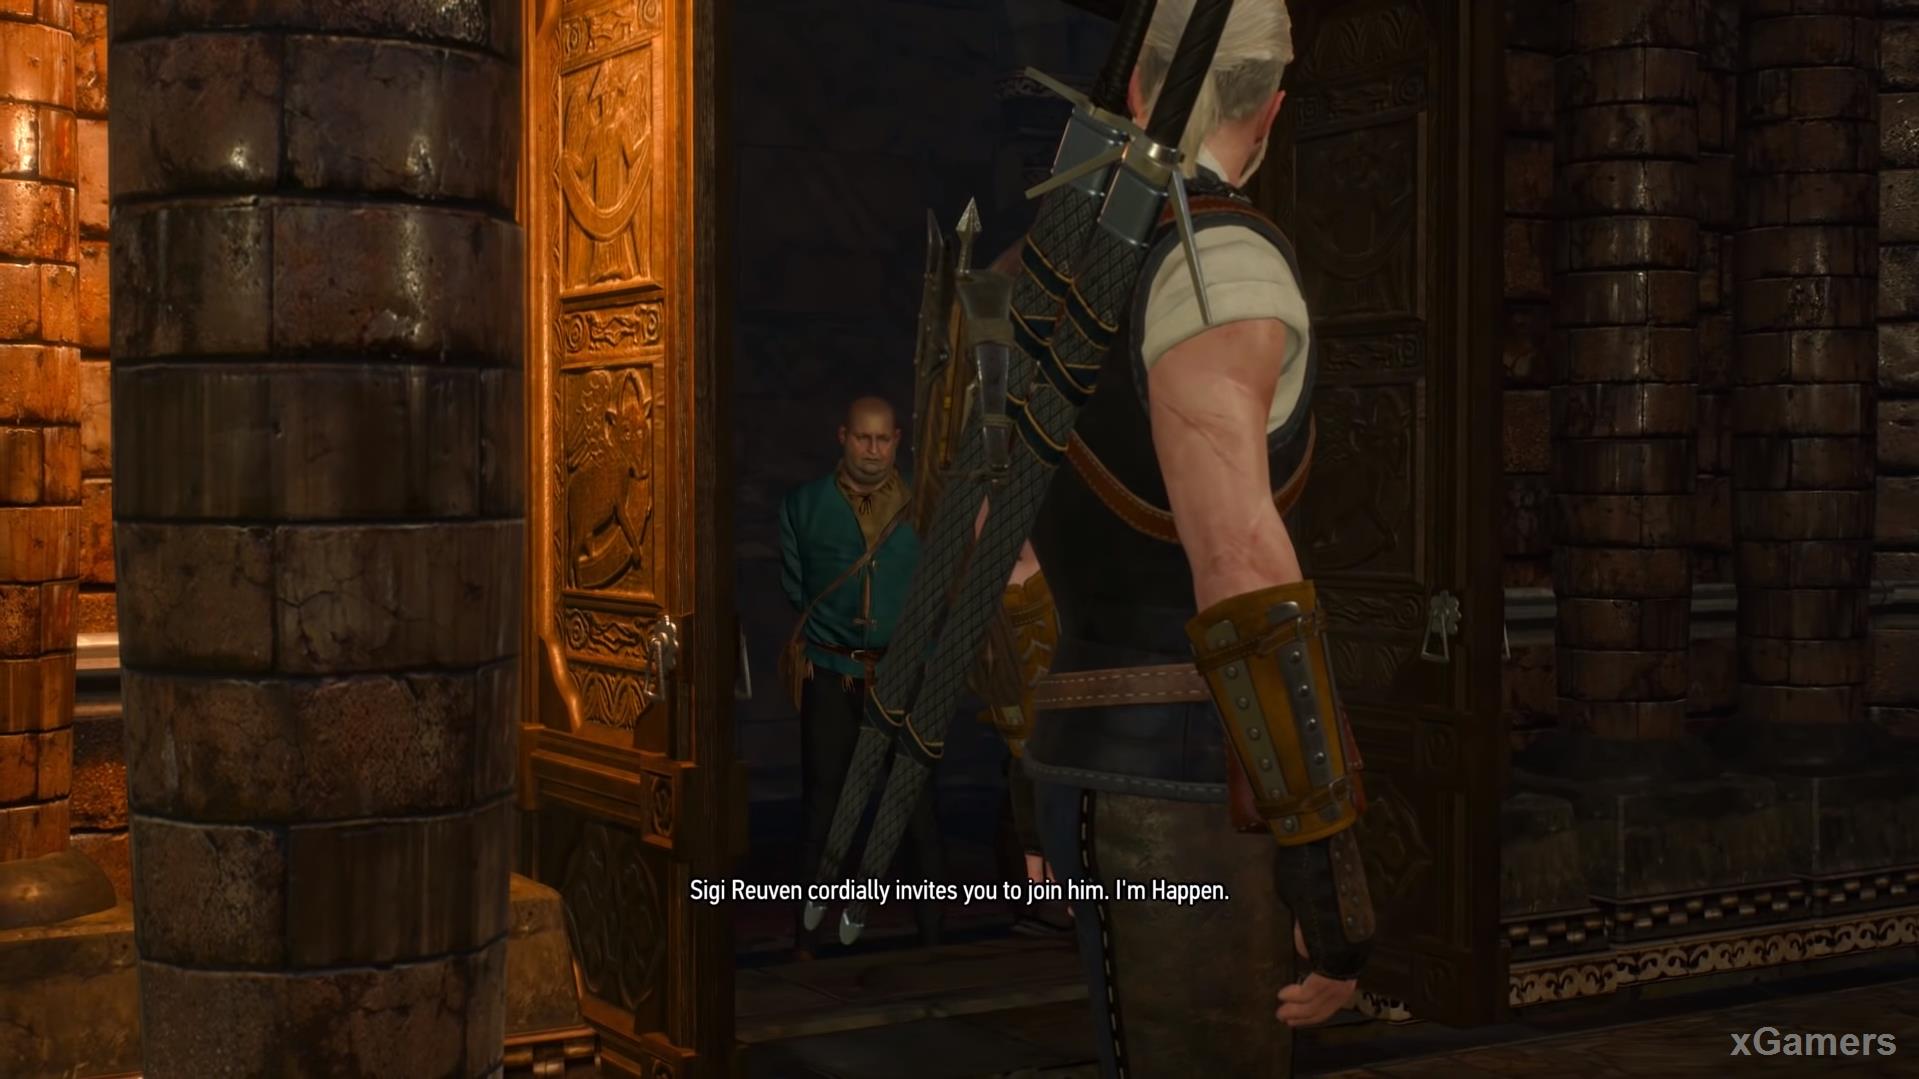 After a brief persuasion, the Witcher is allowed in